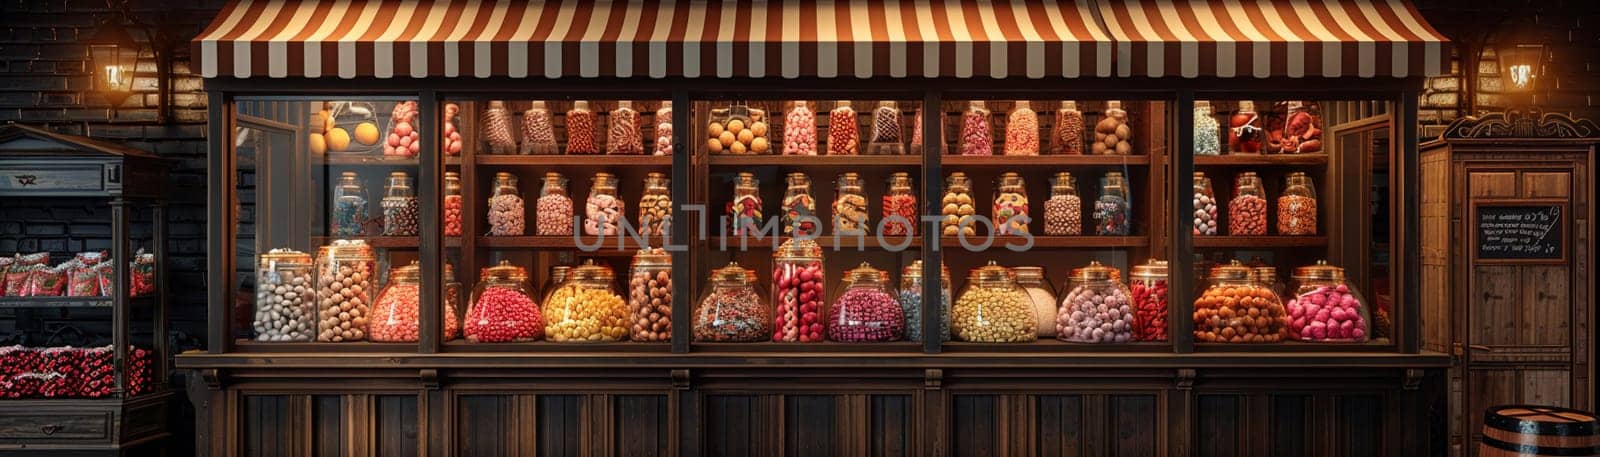 Old-fashioned candy shop with jars of sweets and a striped awning3D render by Benzoix